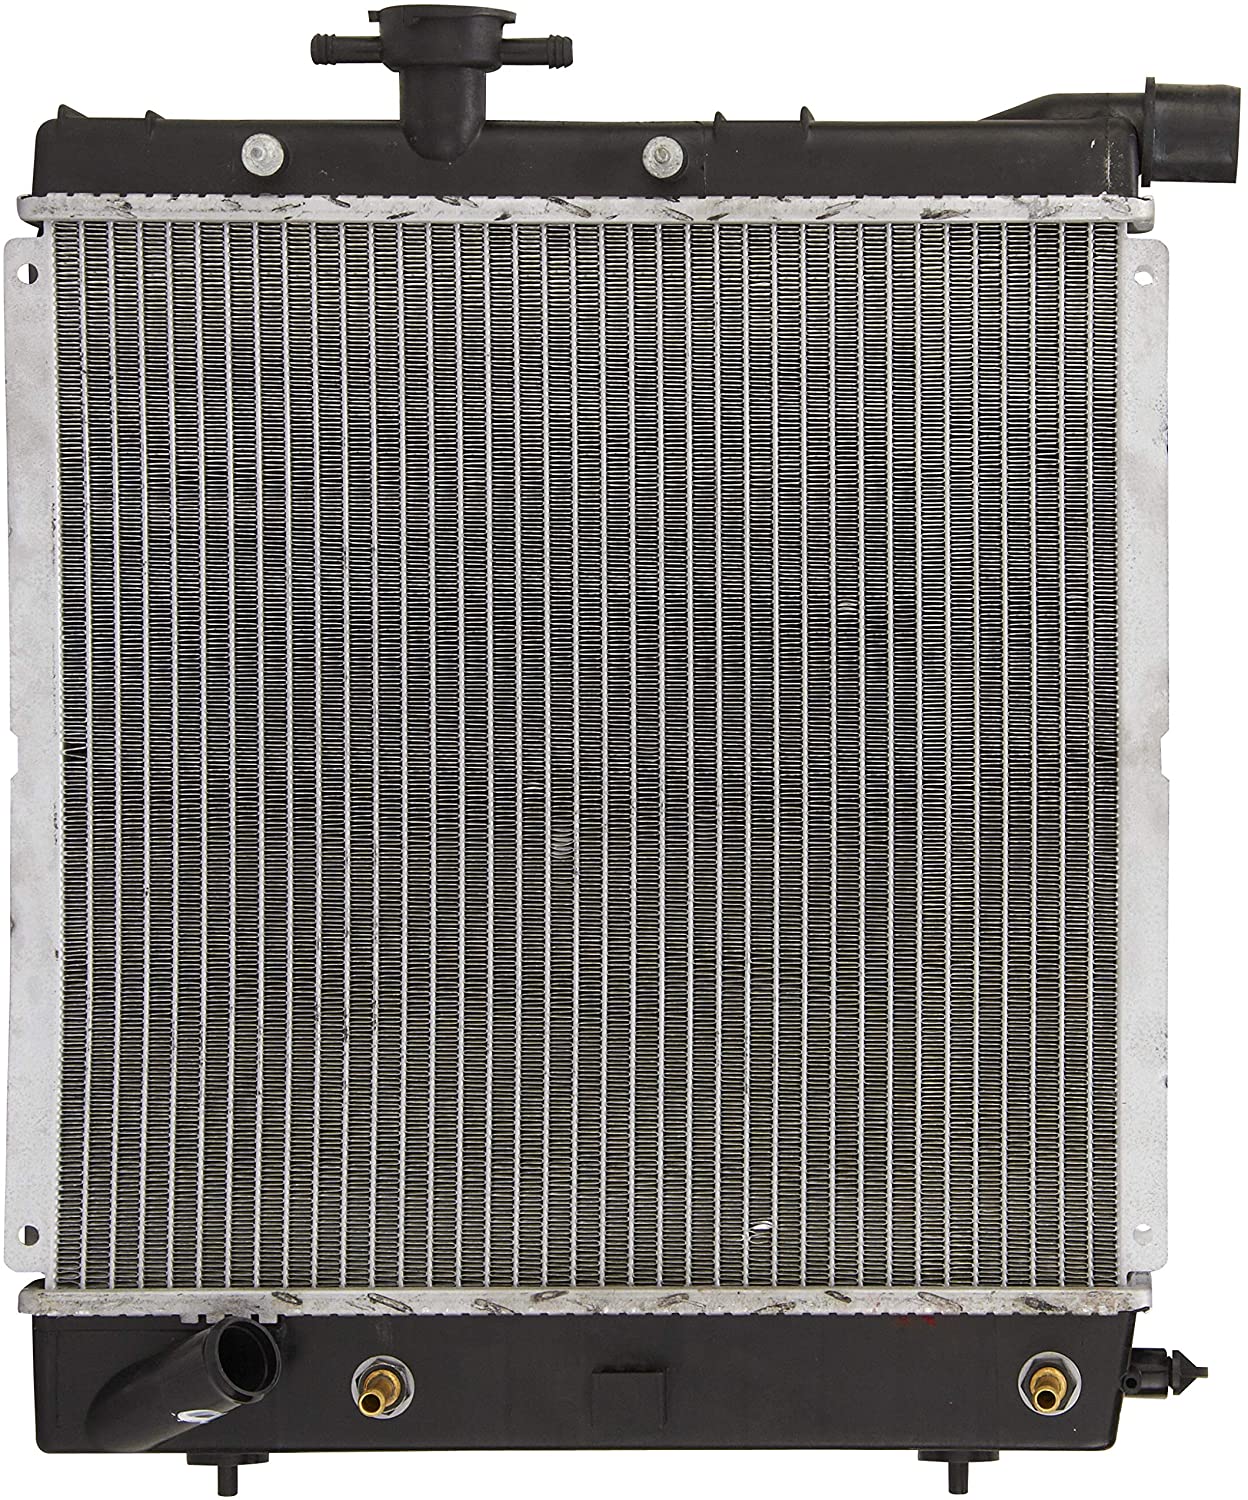 Spectra Premium CU1387 Complete Radiator for Dodge/Plymouth